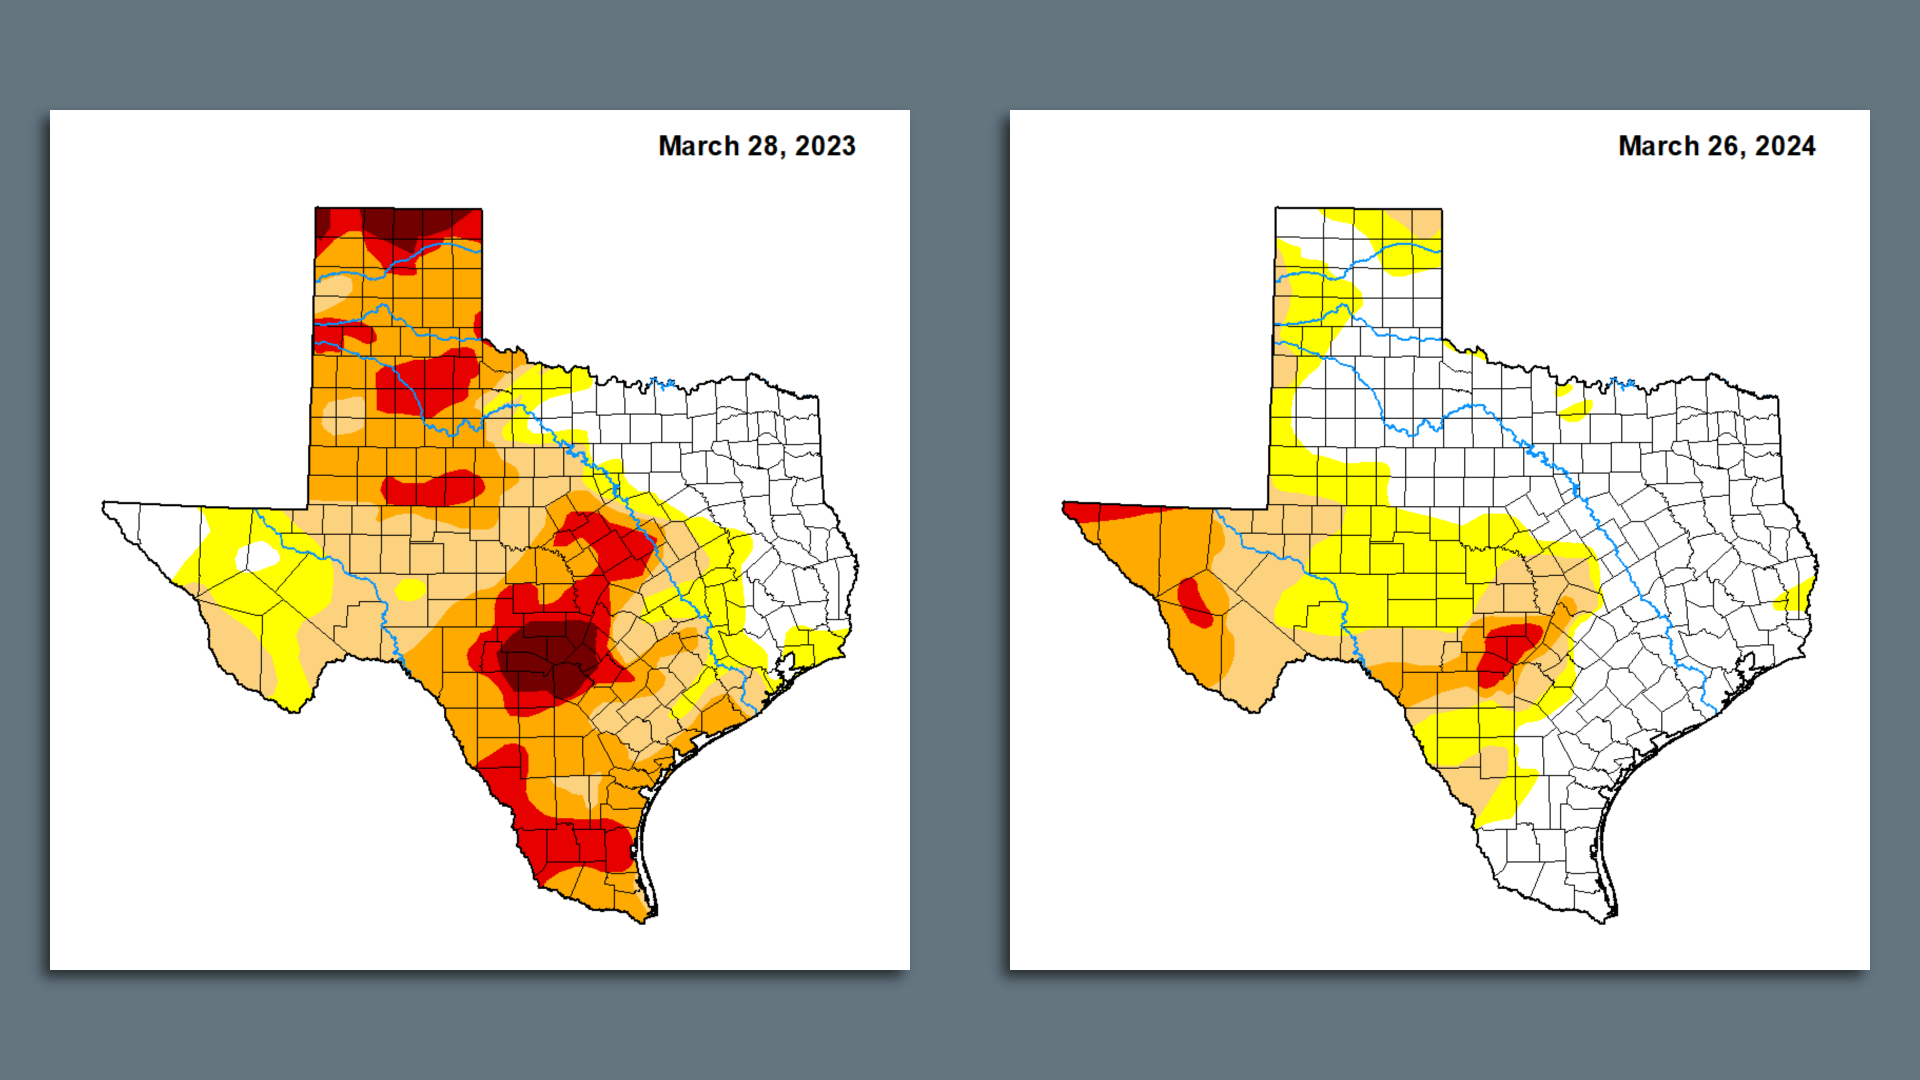 Side-by-side comparisons of drought, showing improvements this year compared to last year.